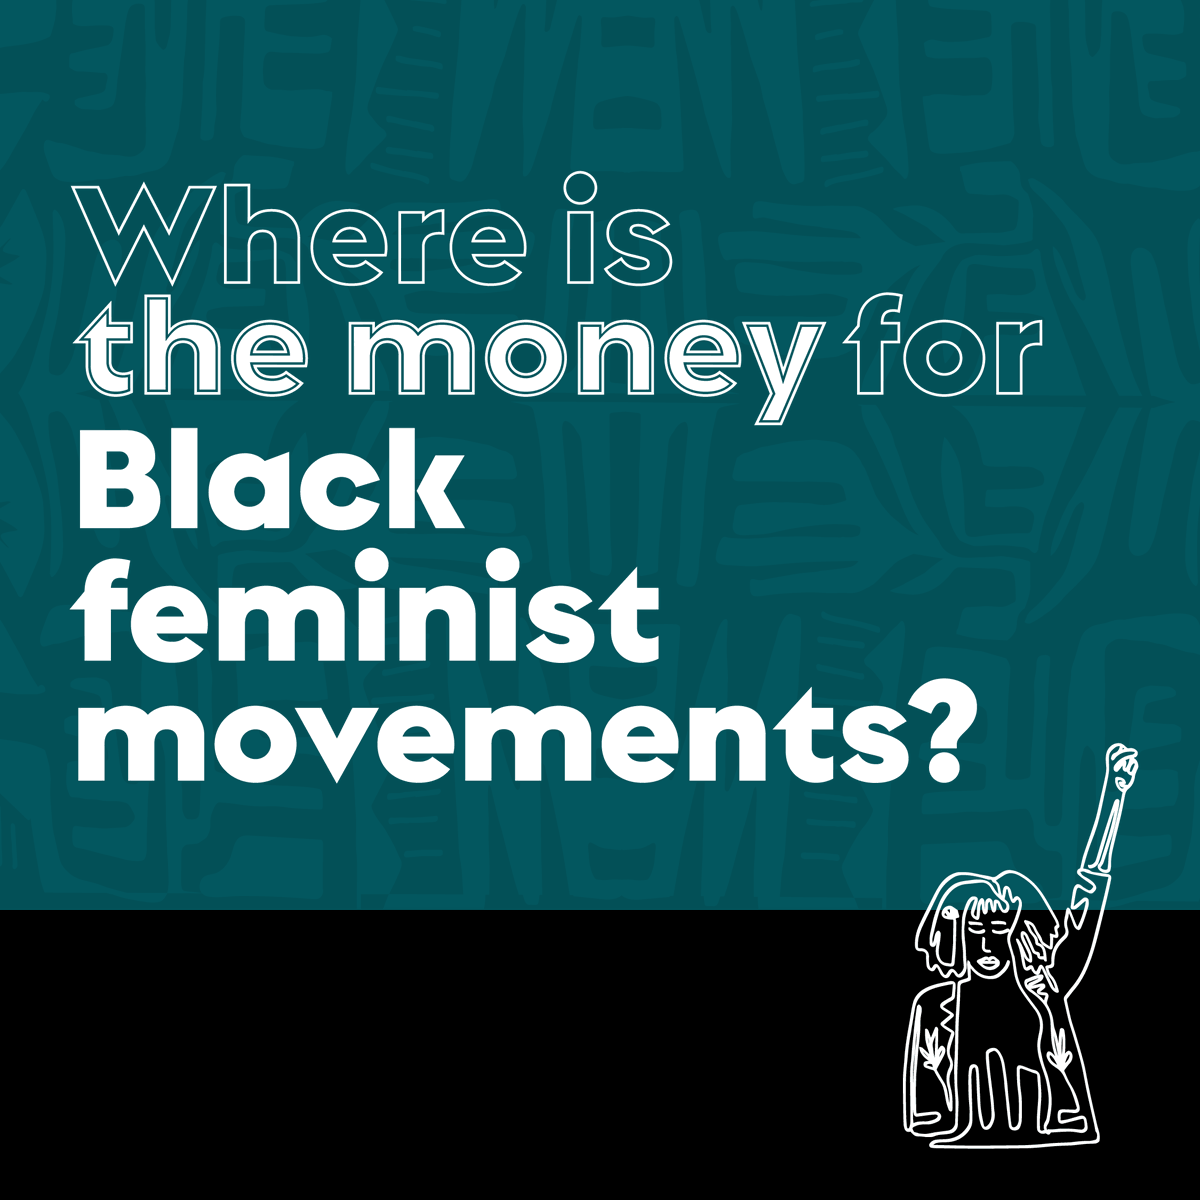 When Black feminists win, global democracy wins. @GlobalFundWomen is proud to support @BlackFemFund on the release of their Open Letter to Philanthropy, a call to action to fund Black feminist movements. blackfeministfund.org #FundBlackFeminists